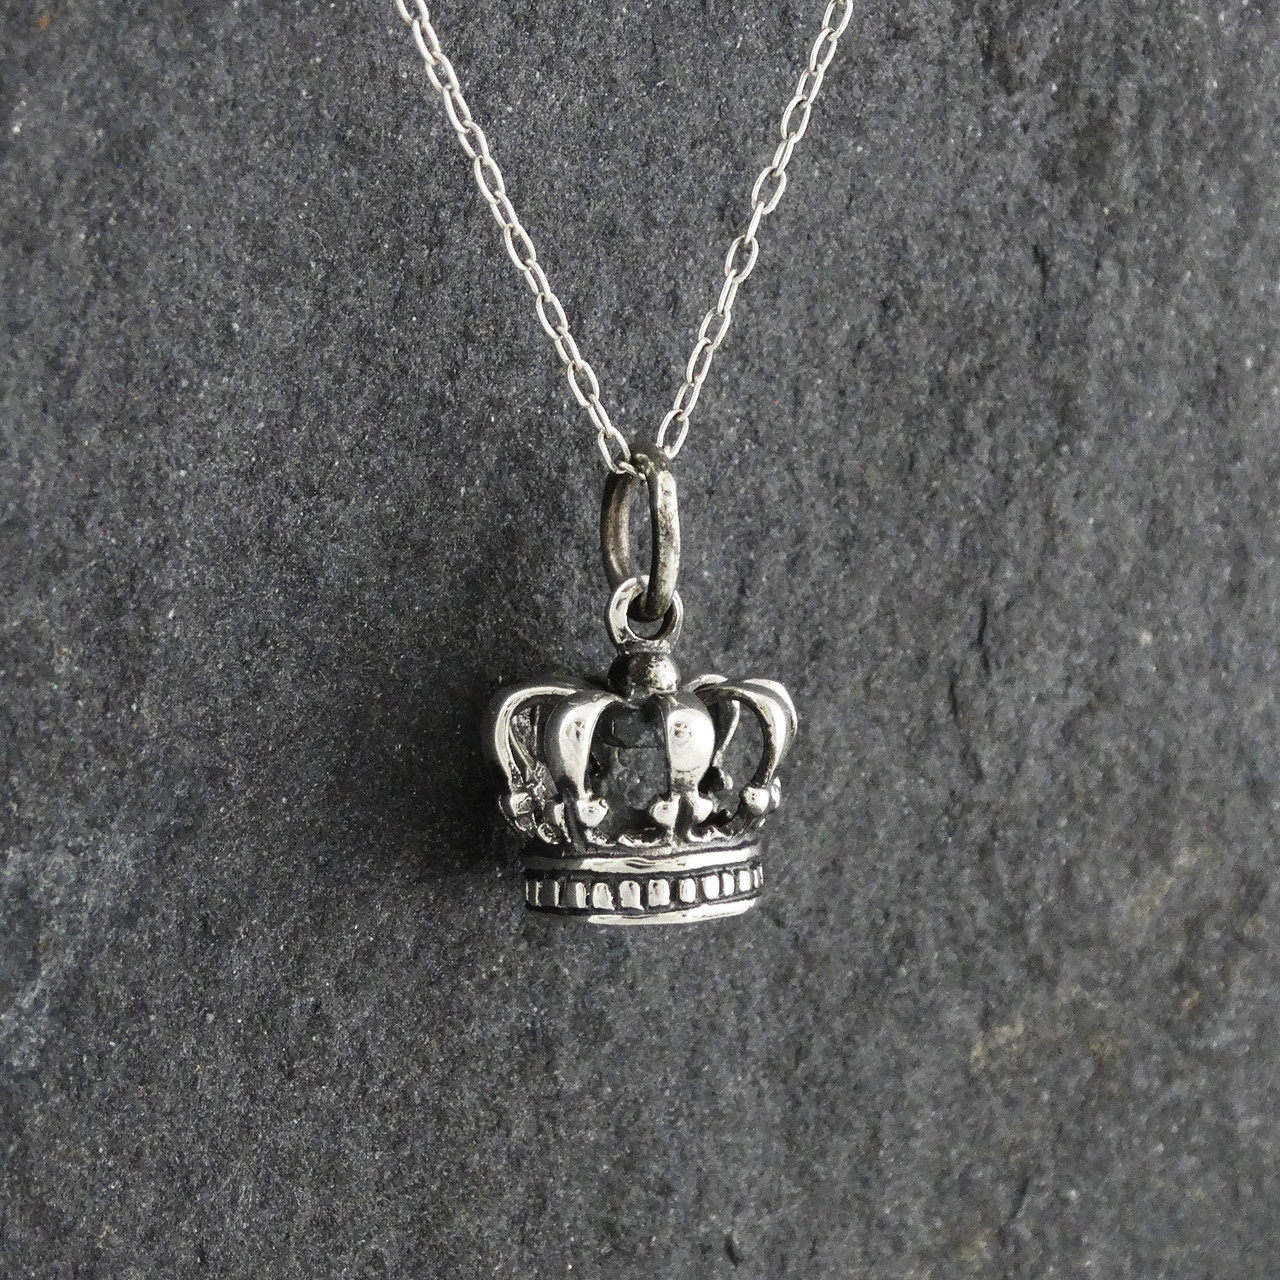 Lot - Tiffany & Co Sterling Silver Crown Charm Necklace